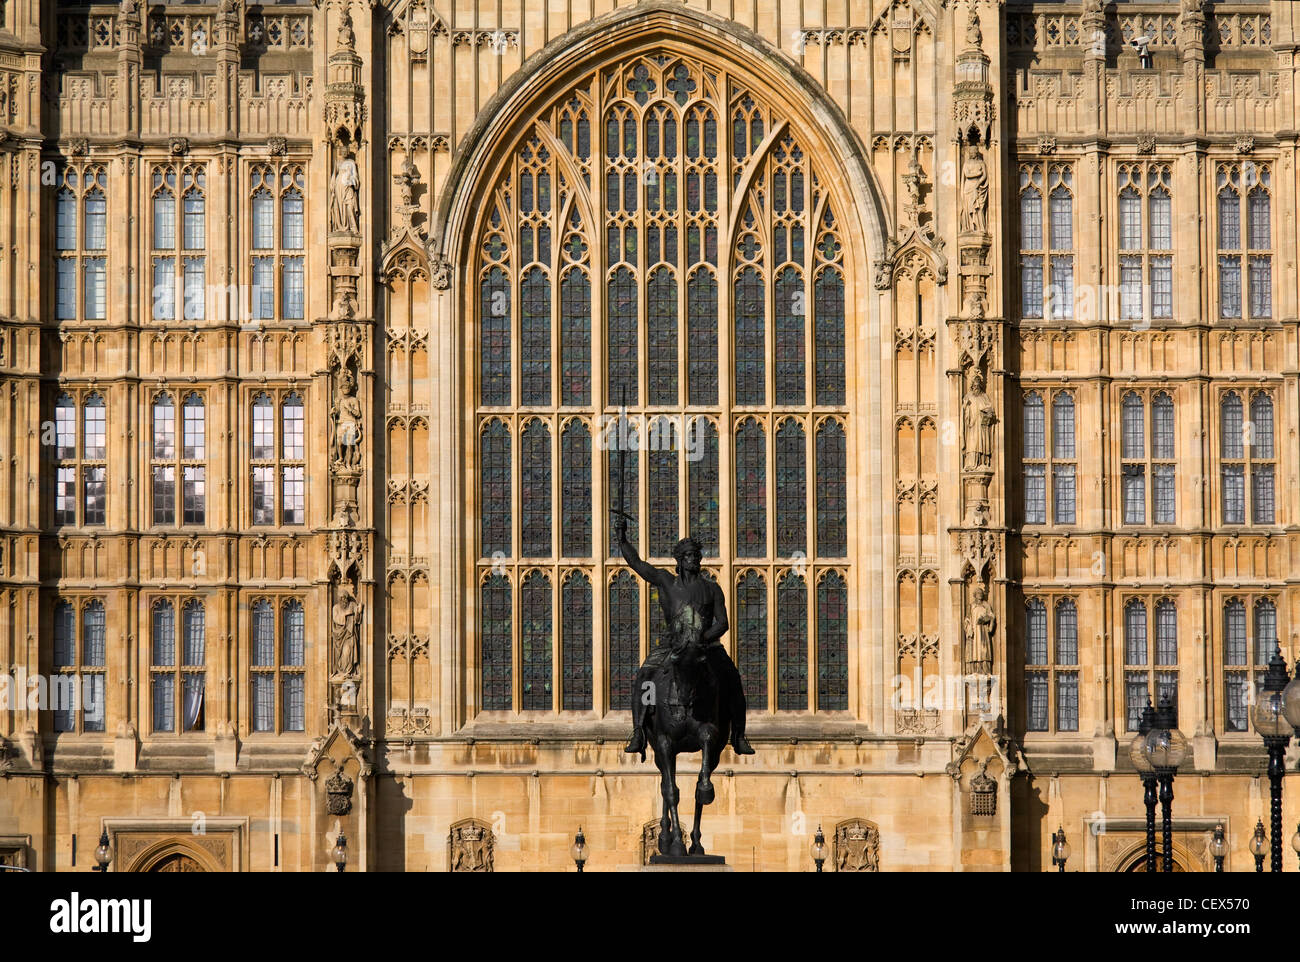 The statue of Richard the Lionheart in front of the Palace of Westminster. Stock Photo